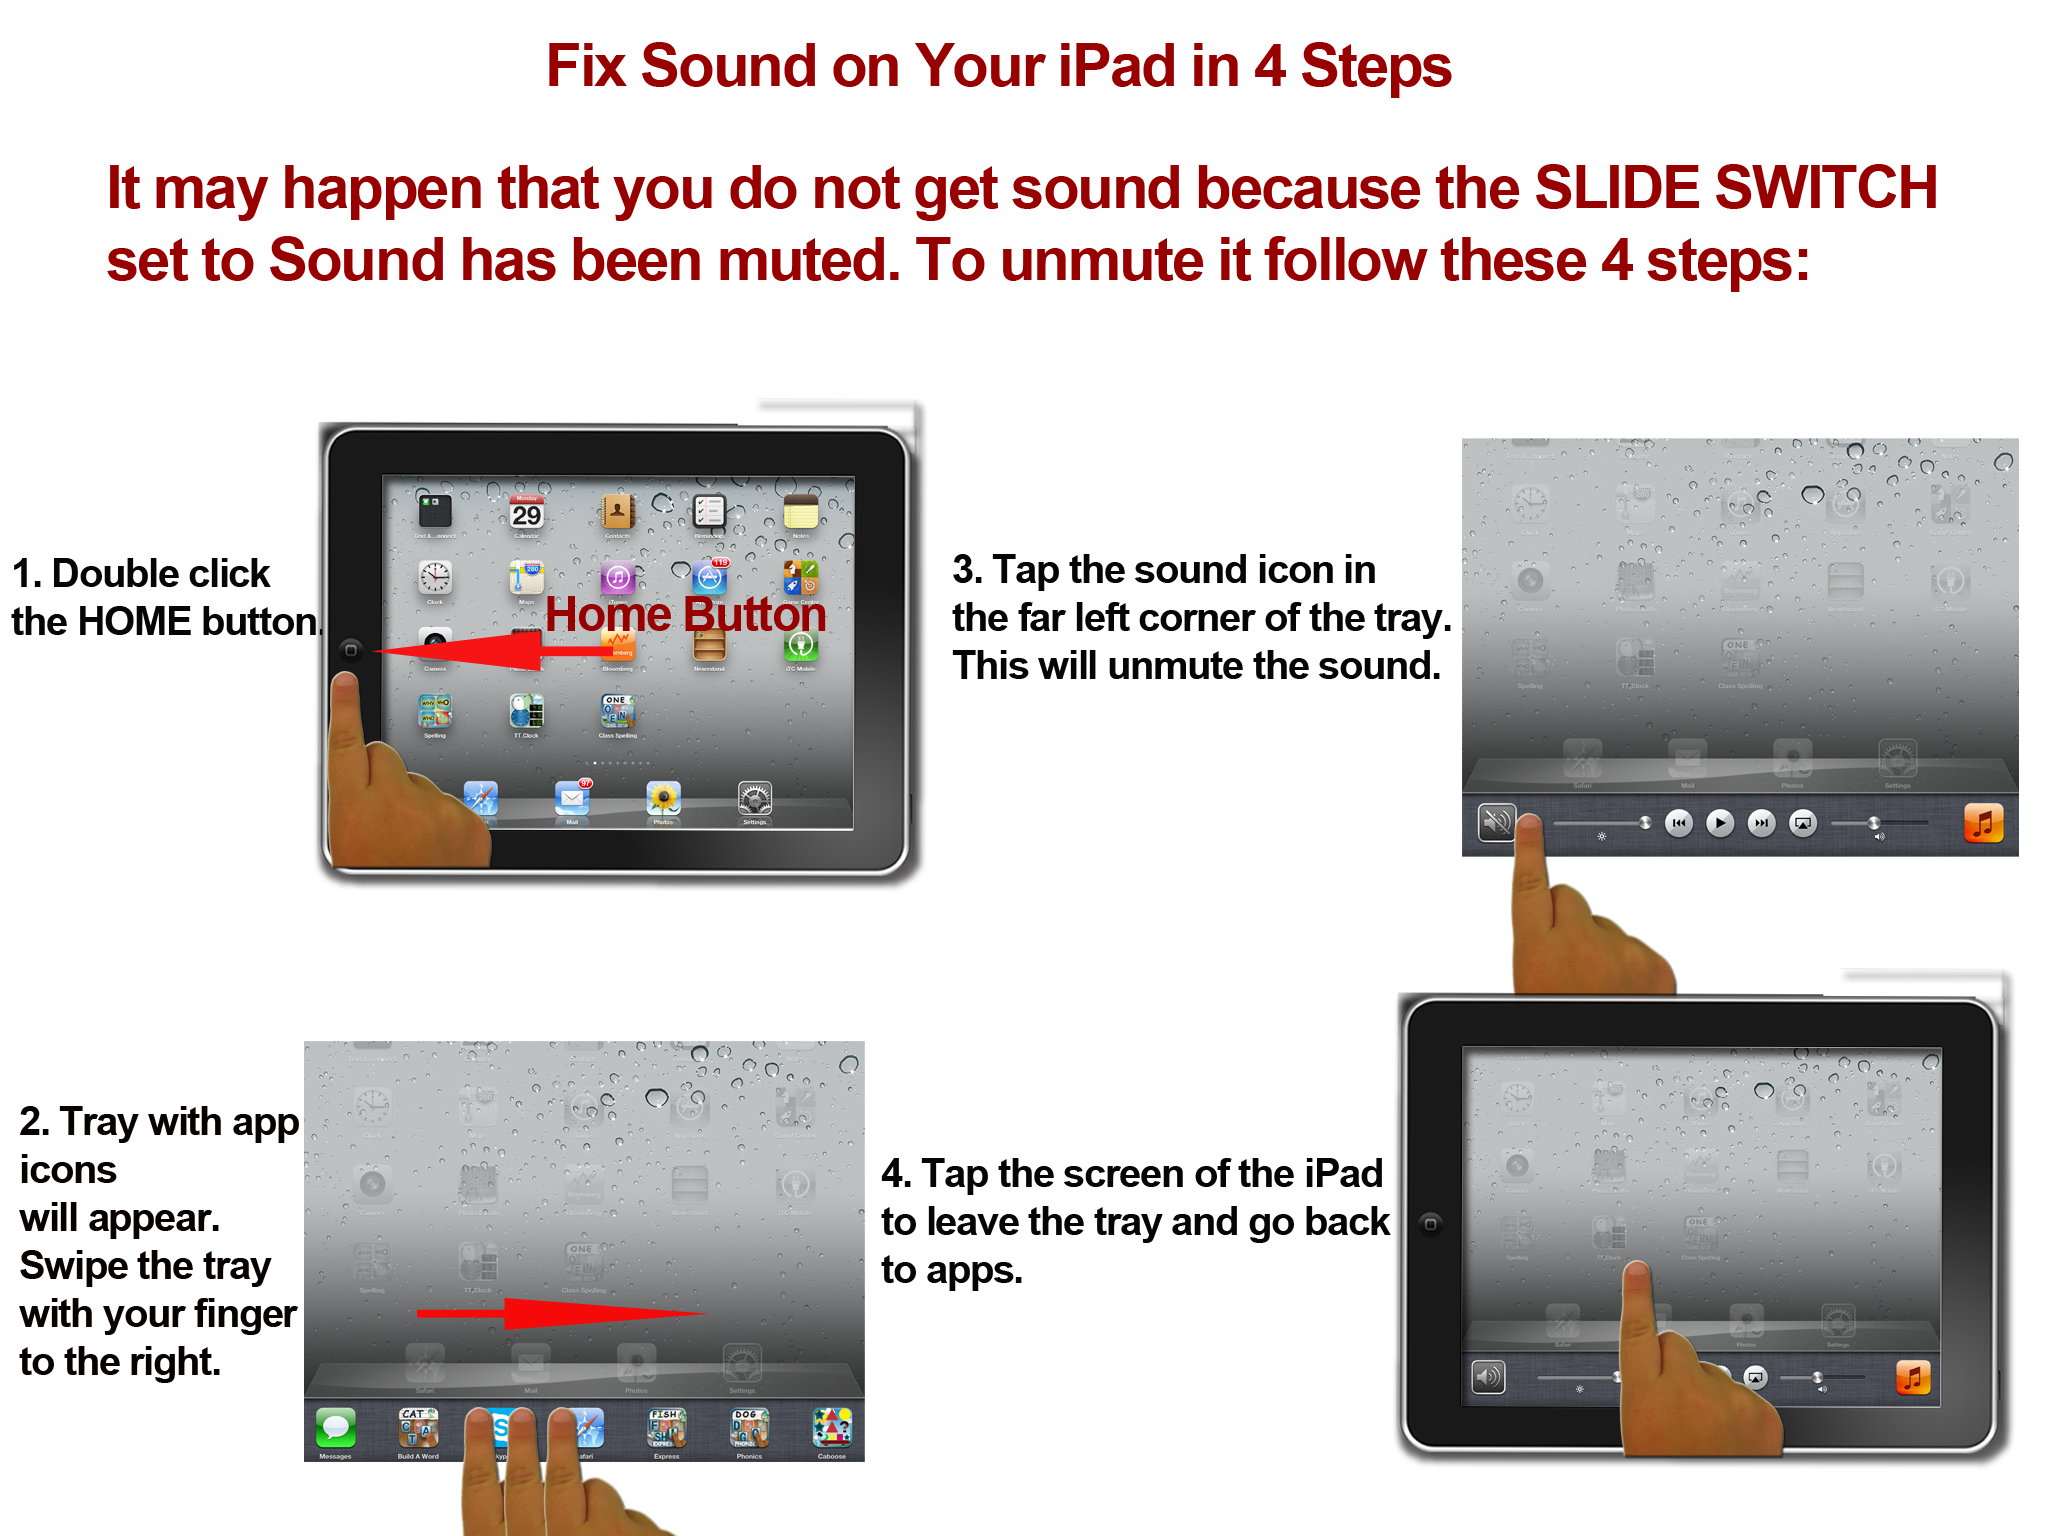 4 Steps to Fix Sound on Your iPad